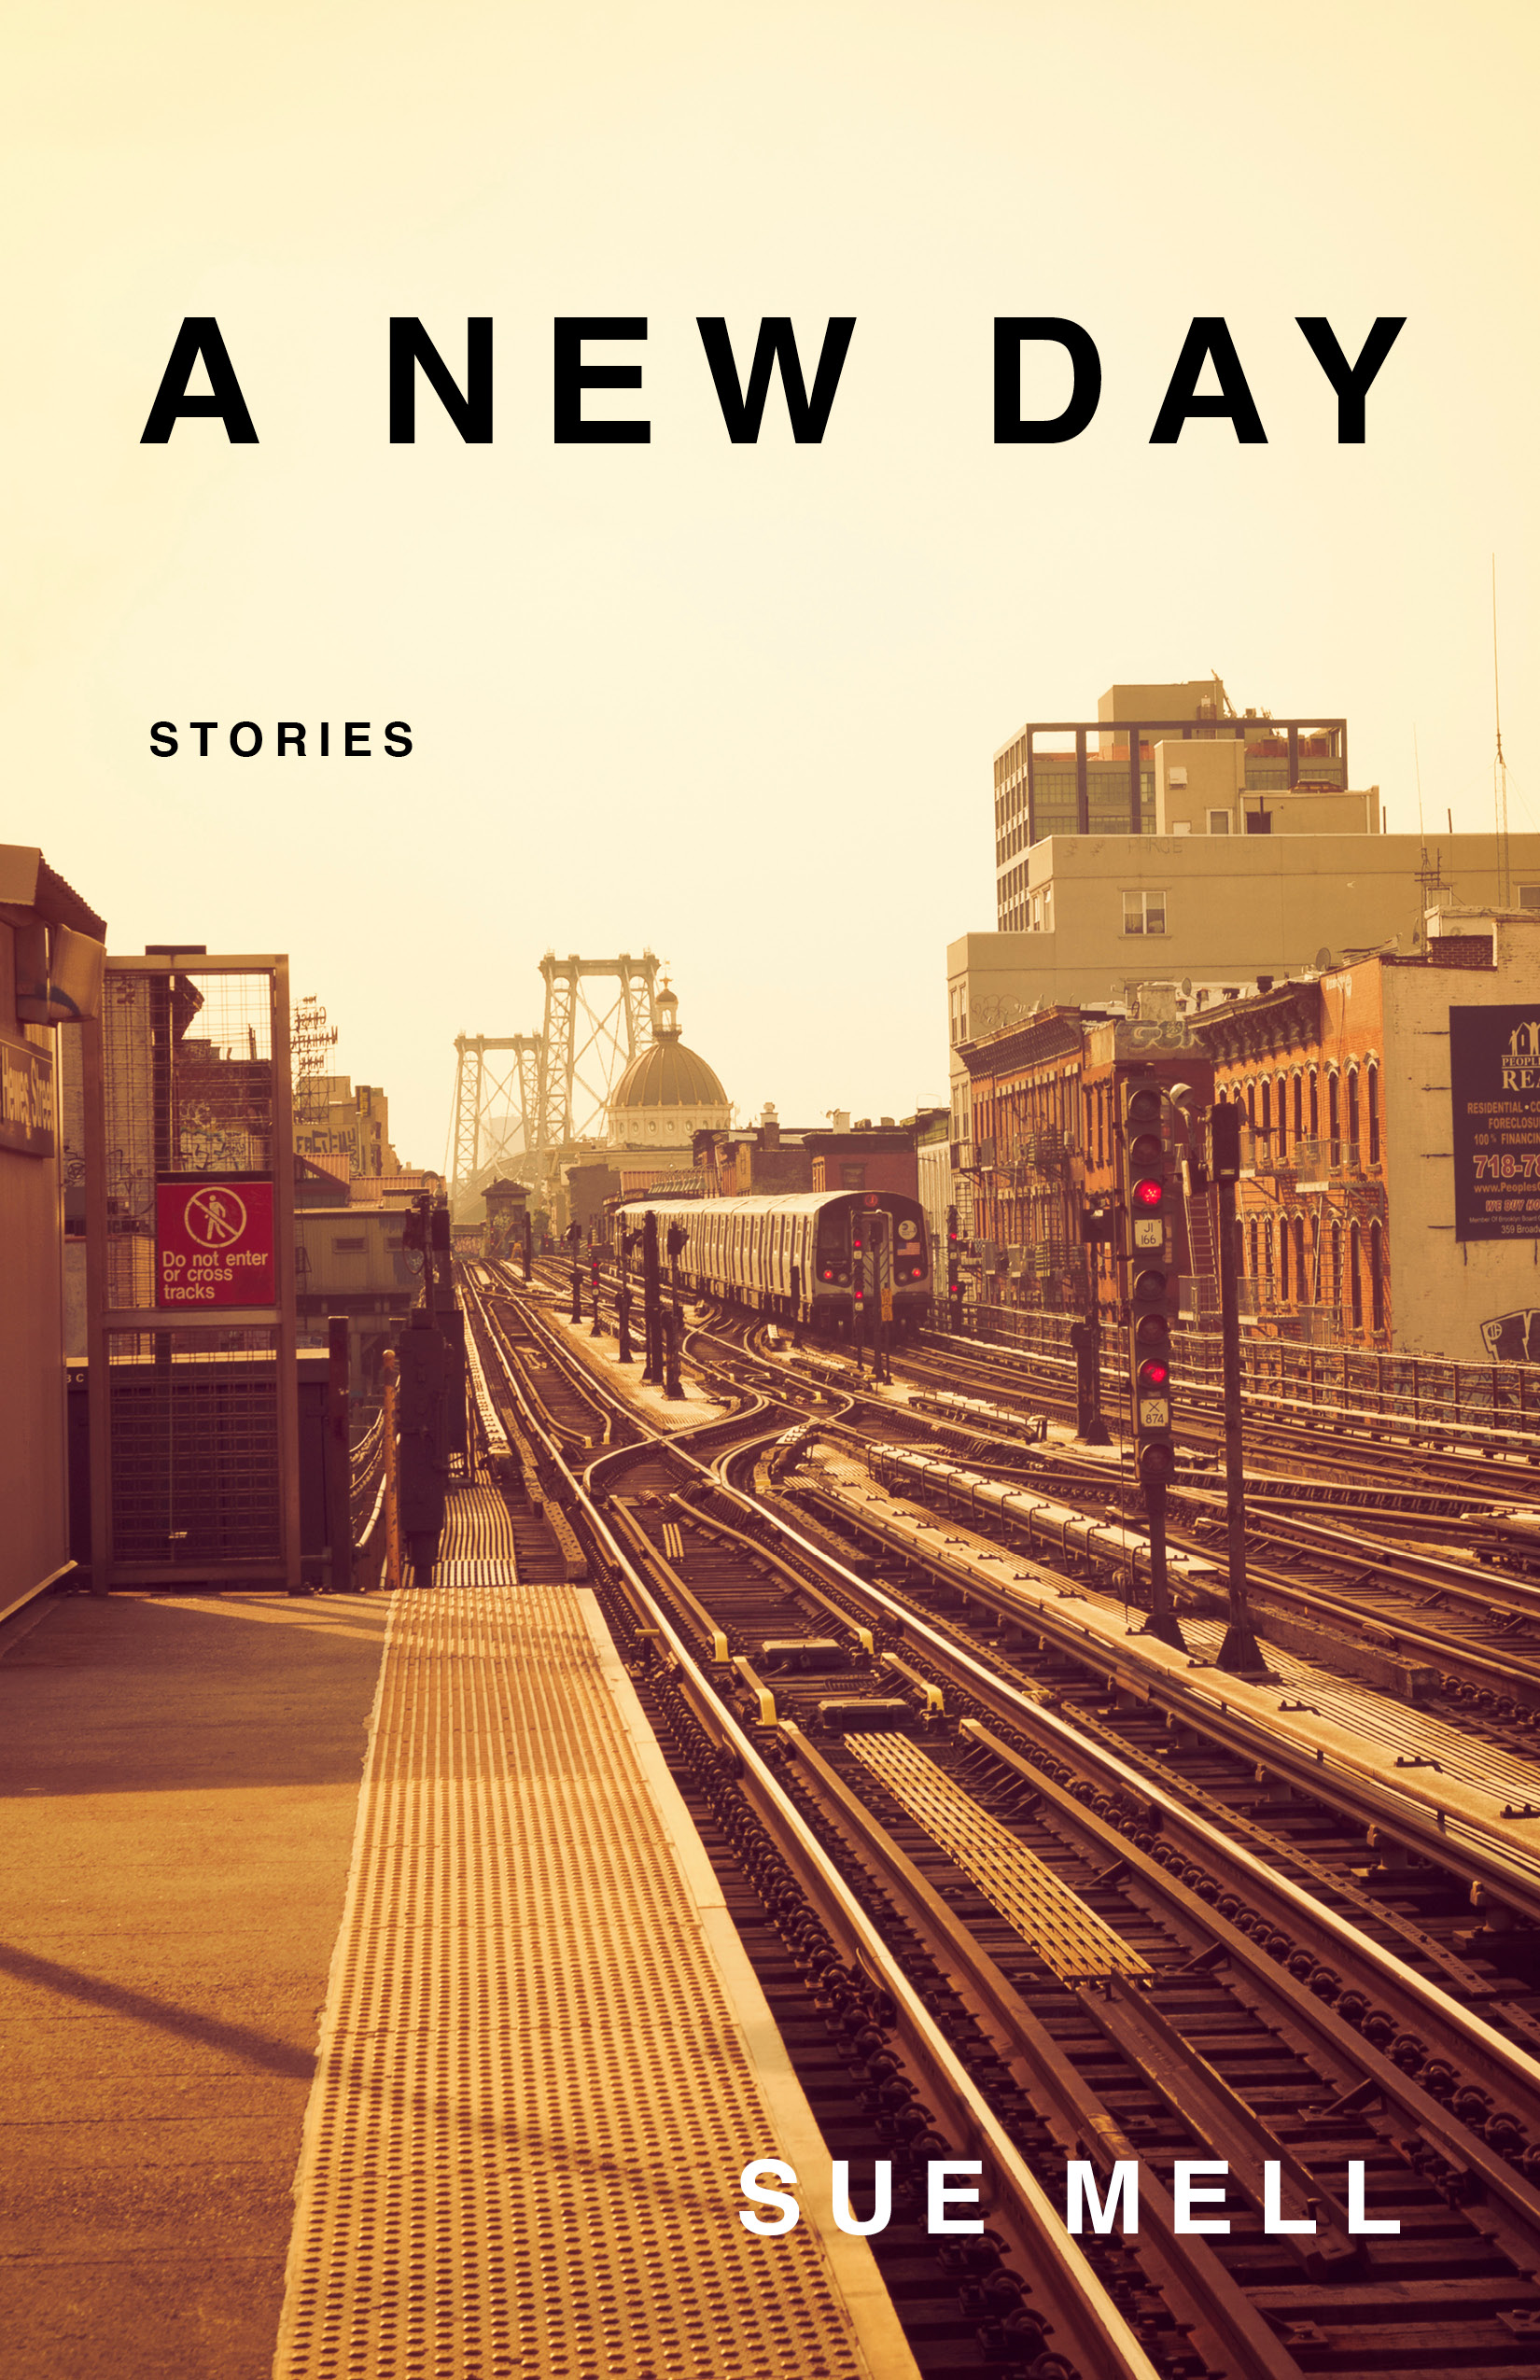 Book Launch: A New Day by Sue Mell in conversation with Megan Staffel